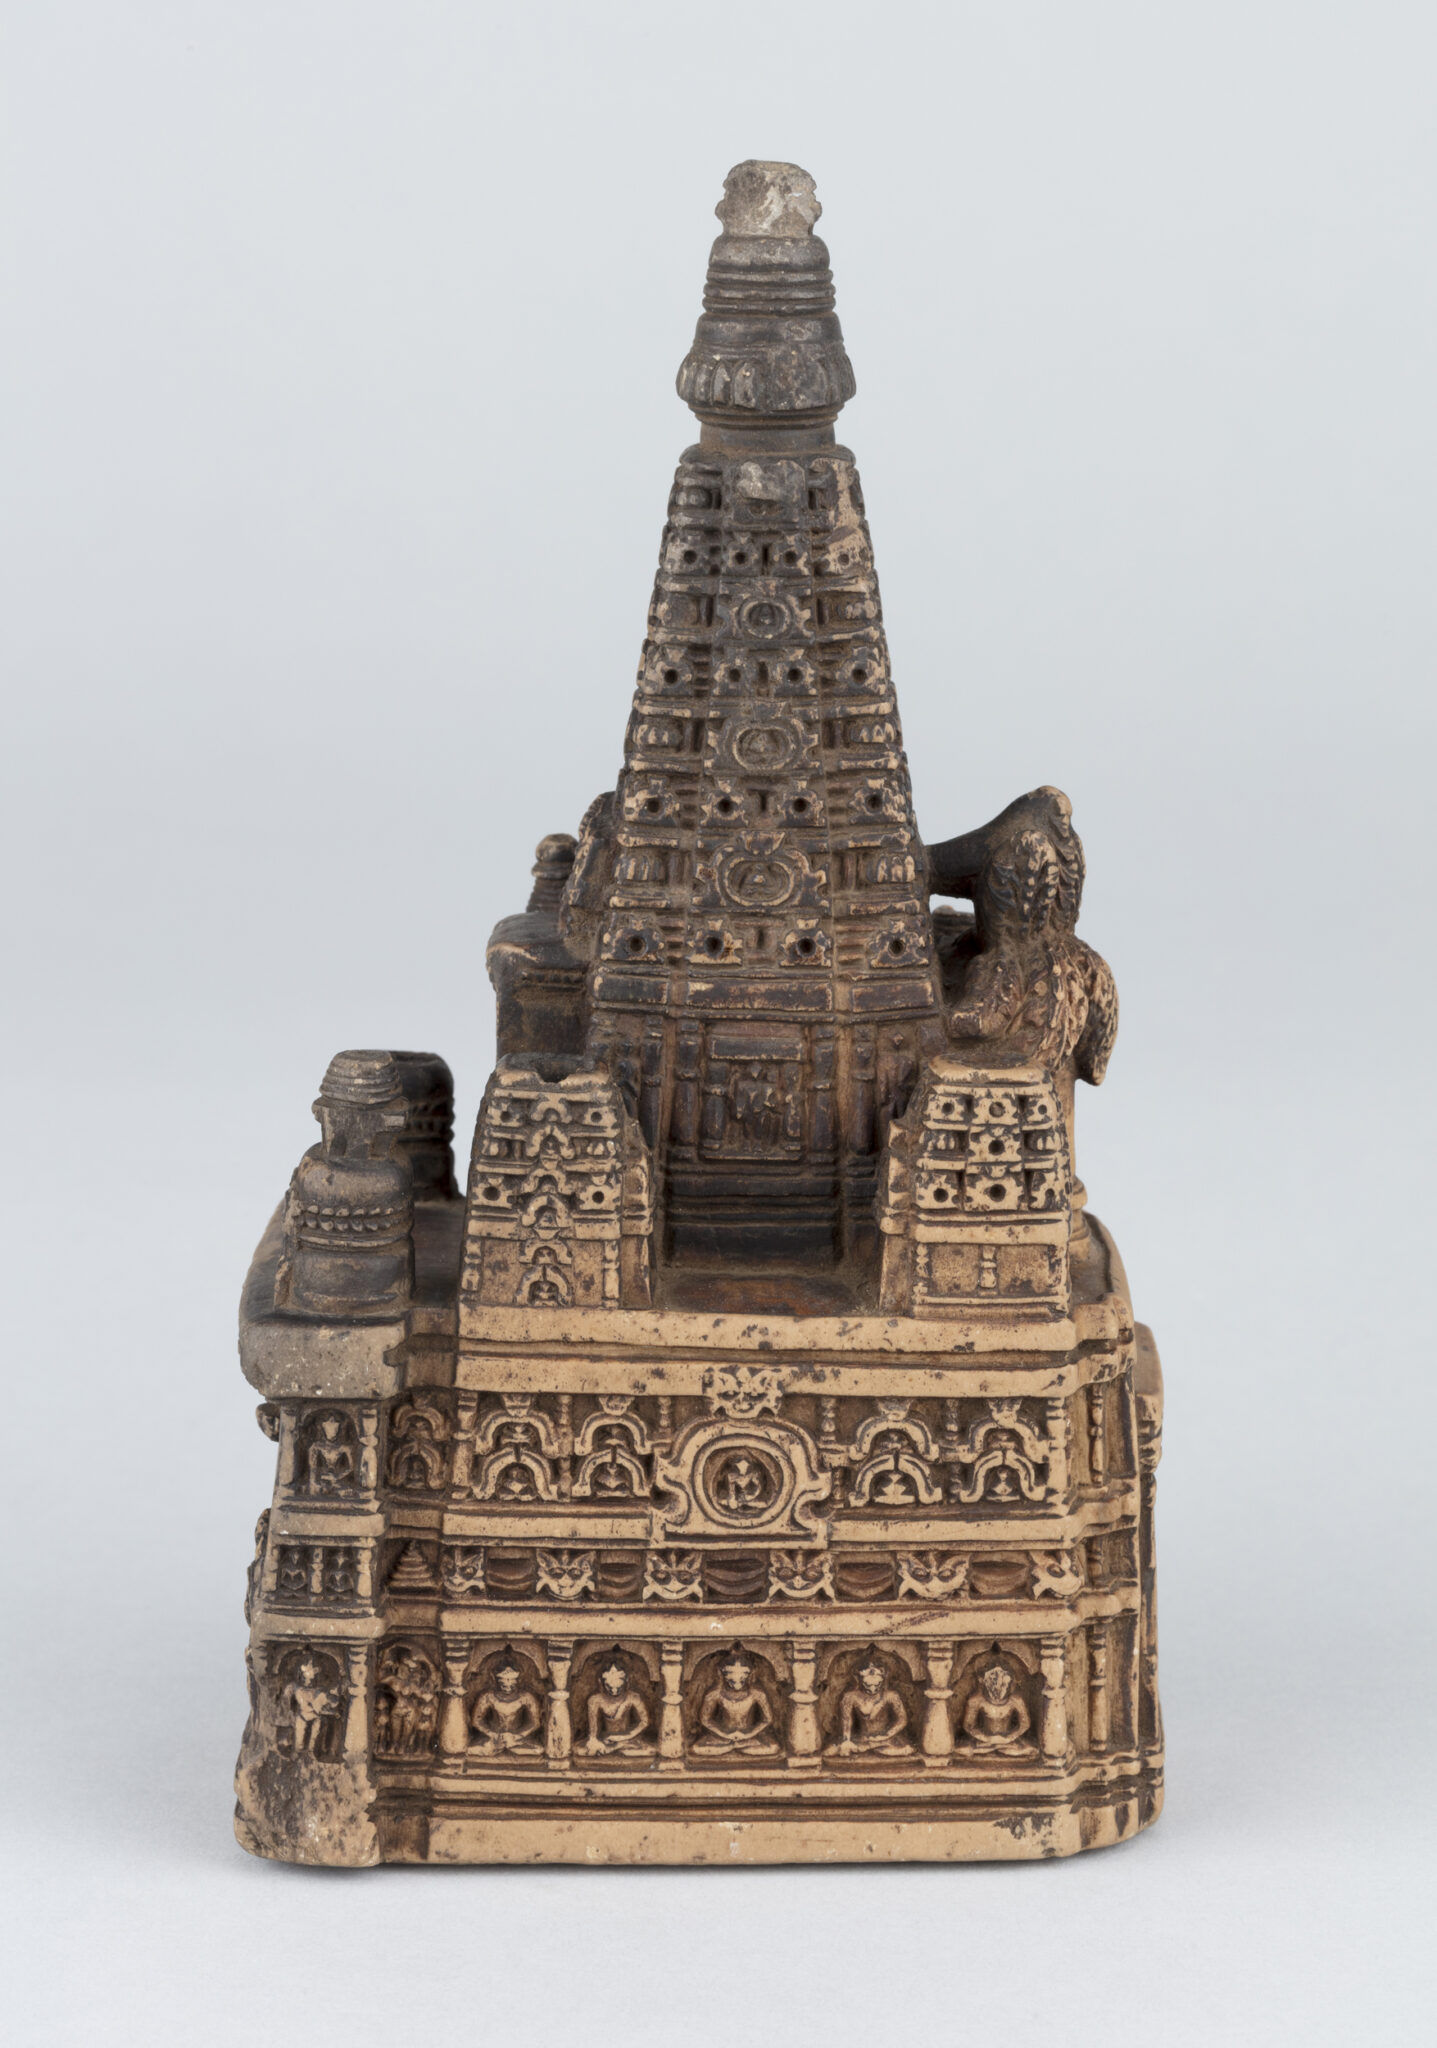 Side view of miniature architectural model with register of seated Buddhas at base and slender tapered roof